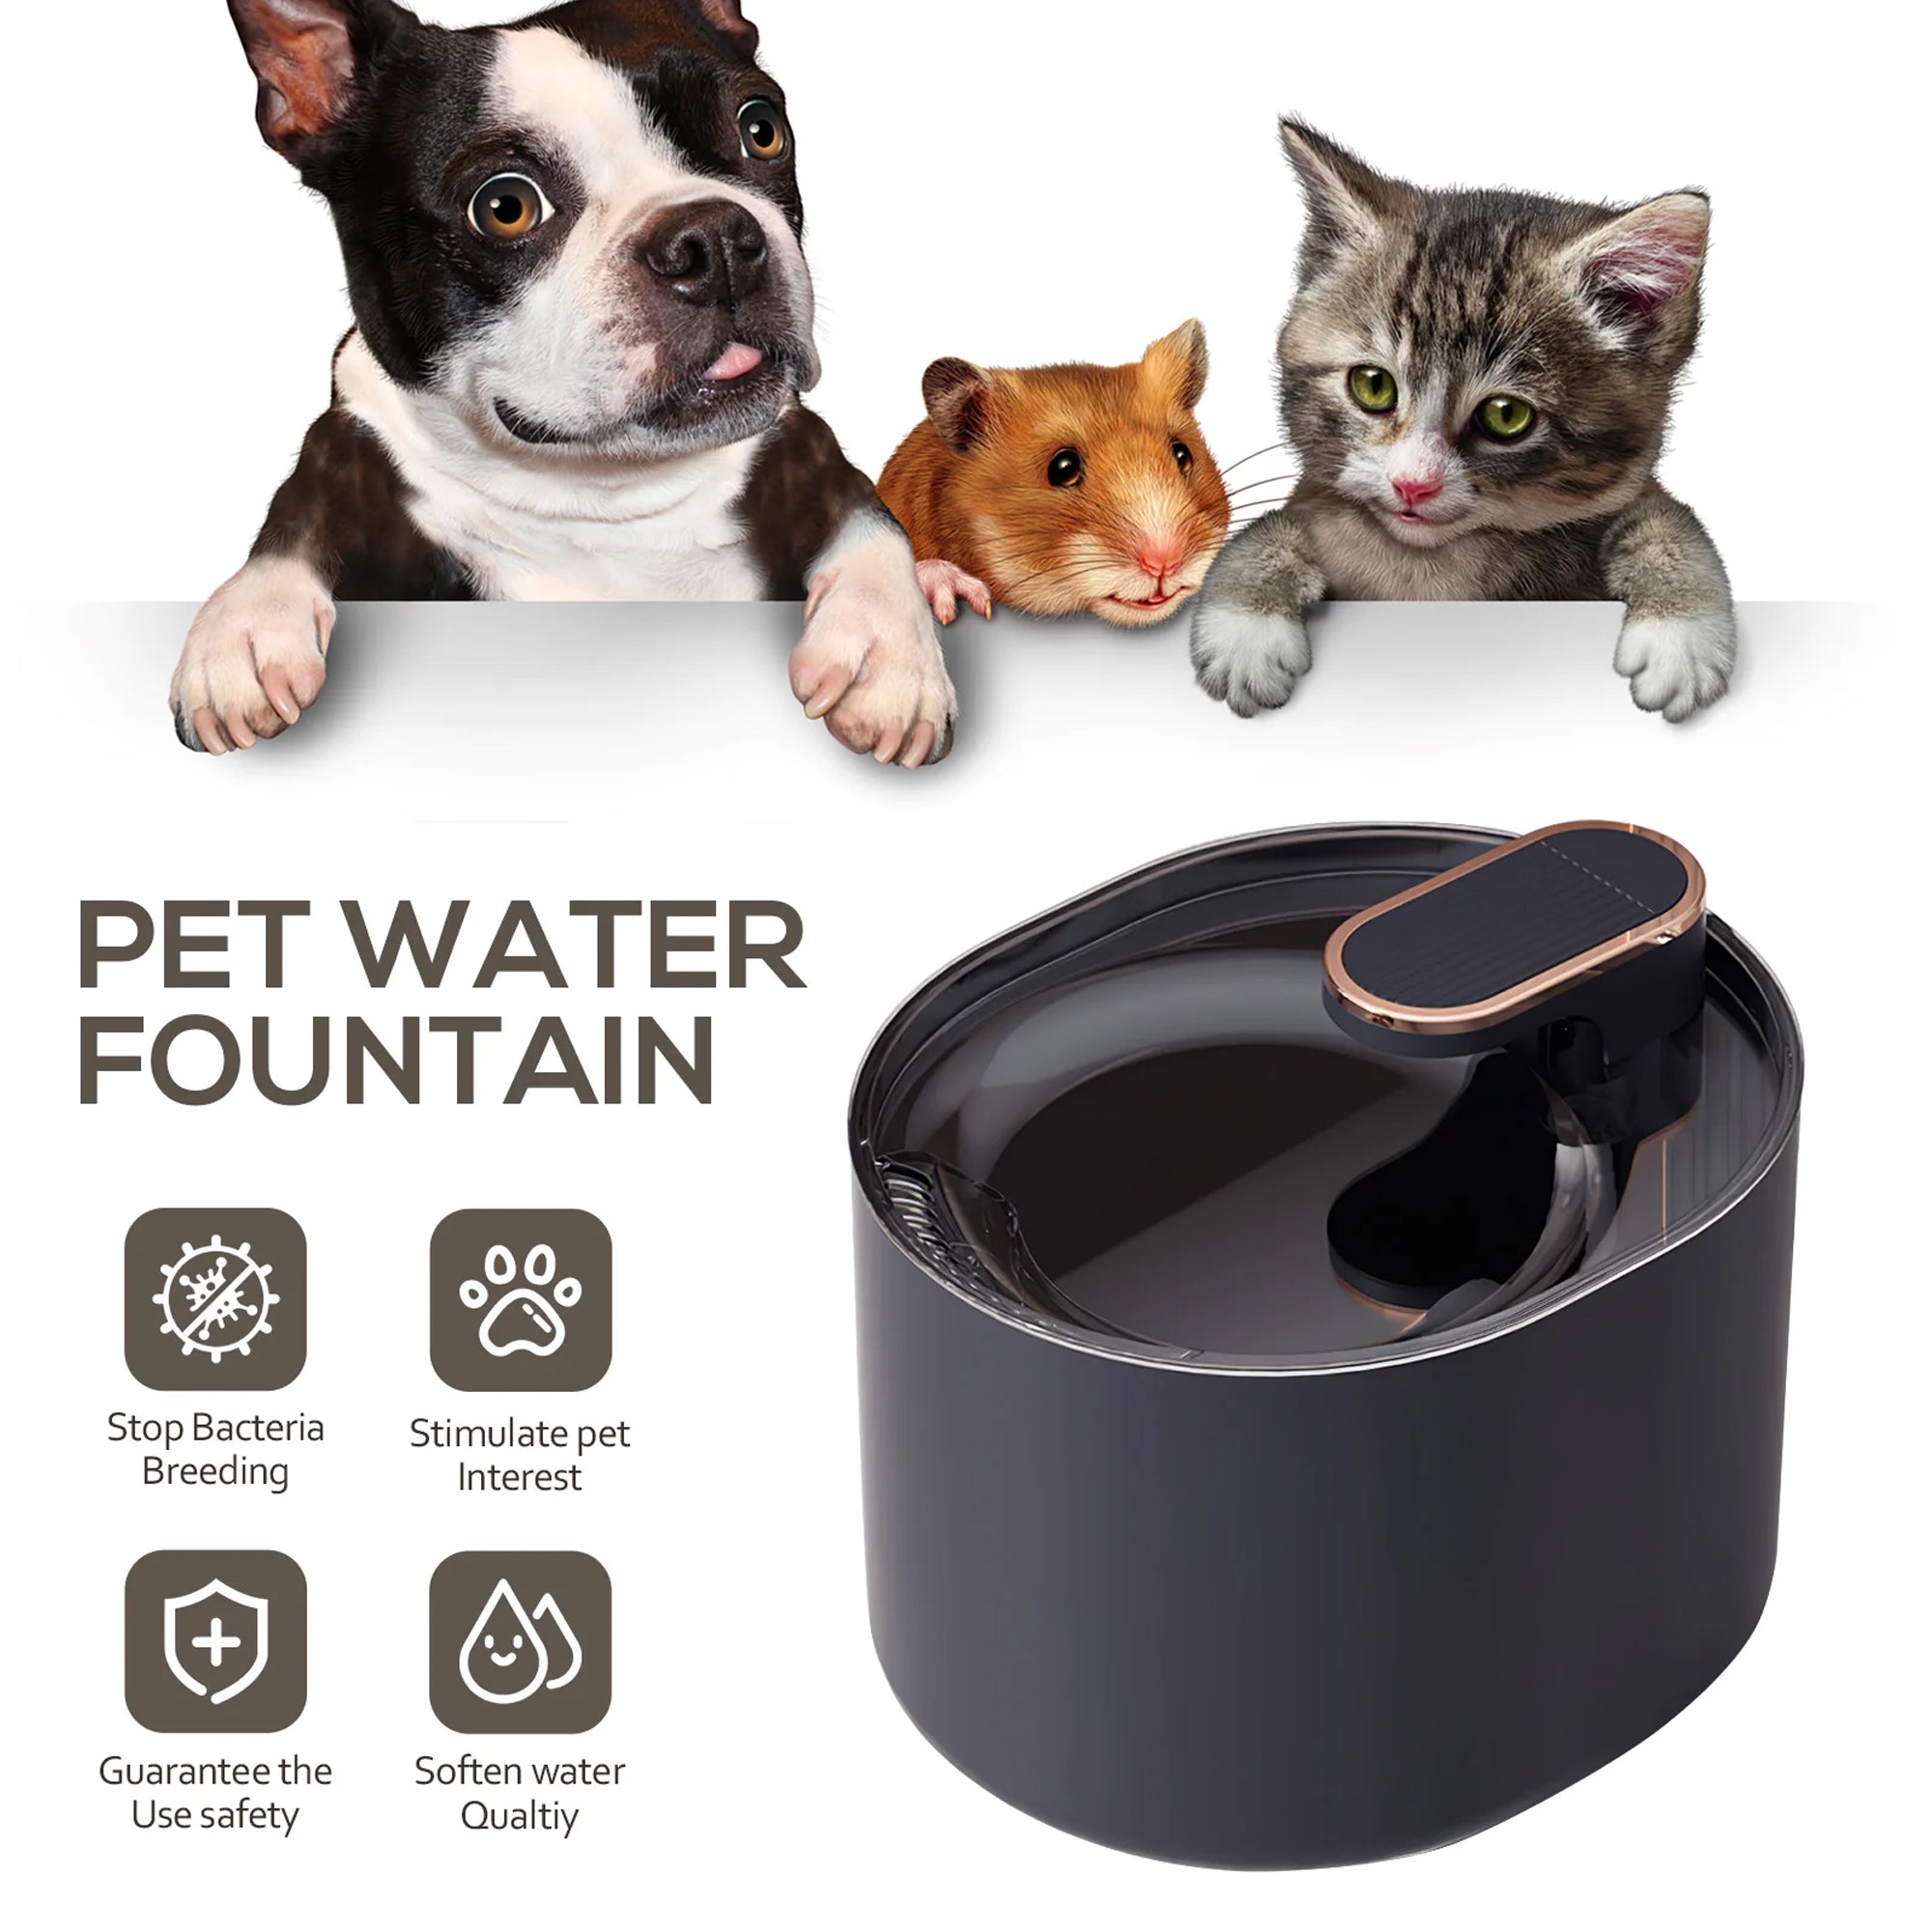 Cat water box Ultra Quiet LED Automatic Water Fountain with 7 Filters, Best Care Cat